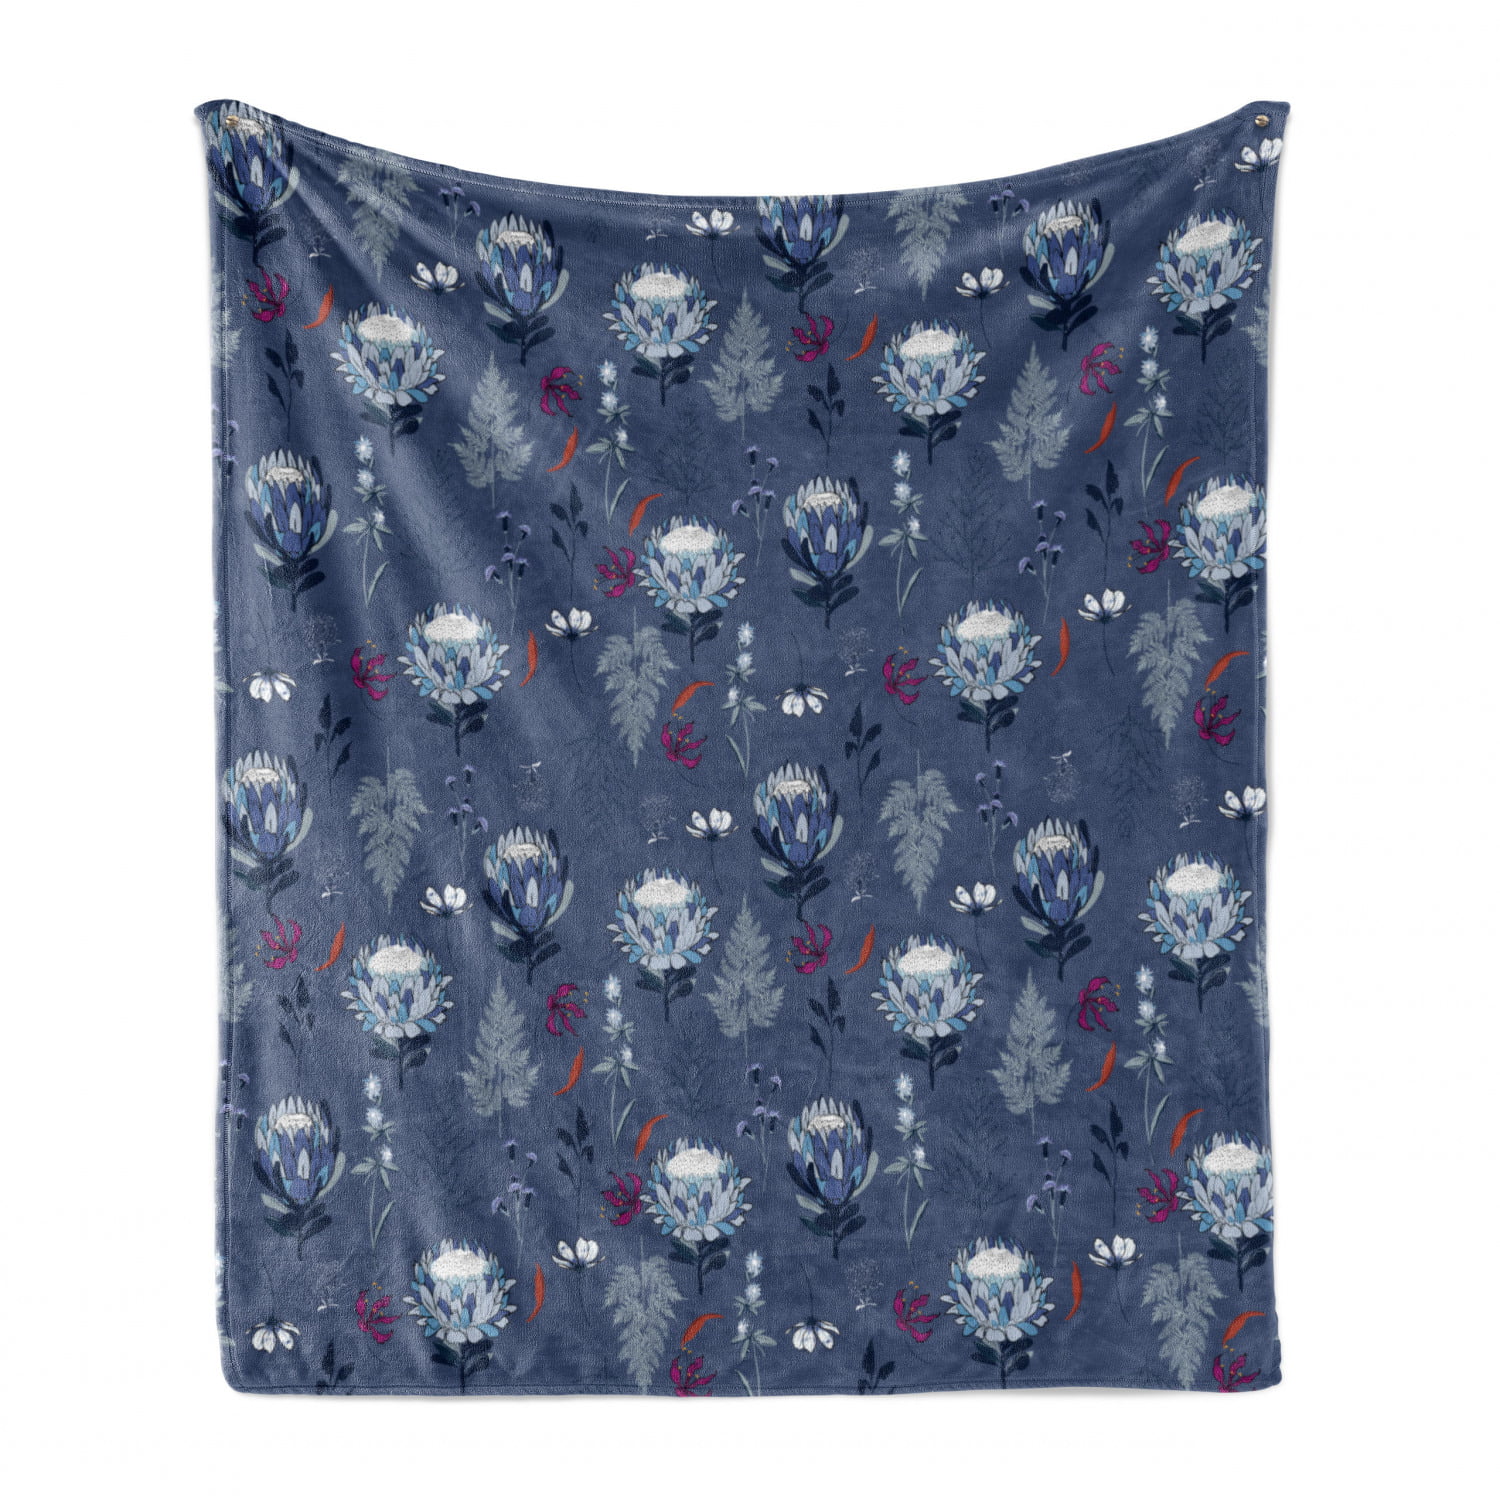 50 x 60 Ambesonne Botanical Throw Blanket Soft Blue Tone Protea Flowers Flourishing in Abstract Garden Retro Floral Theme Multicolor Flannel Fleece Accent Piece Soft Couch Cover for Adults